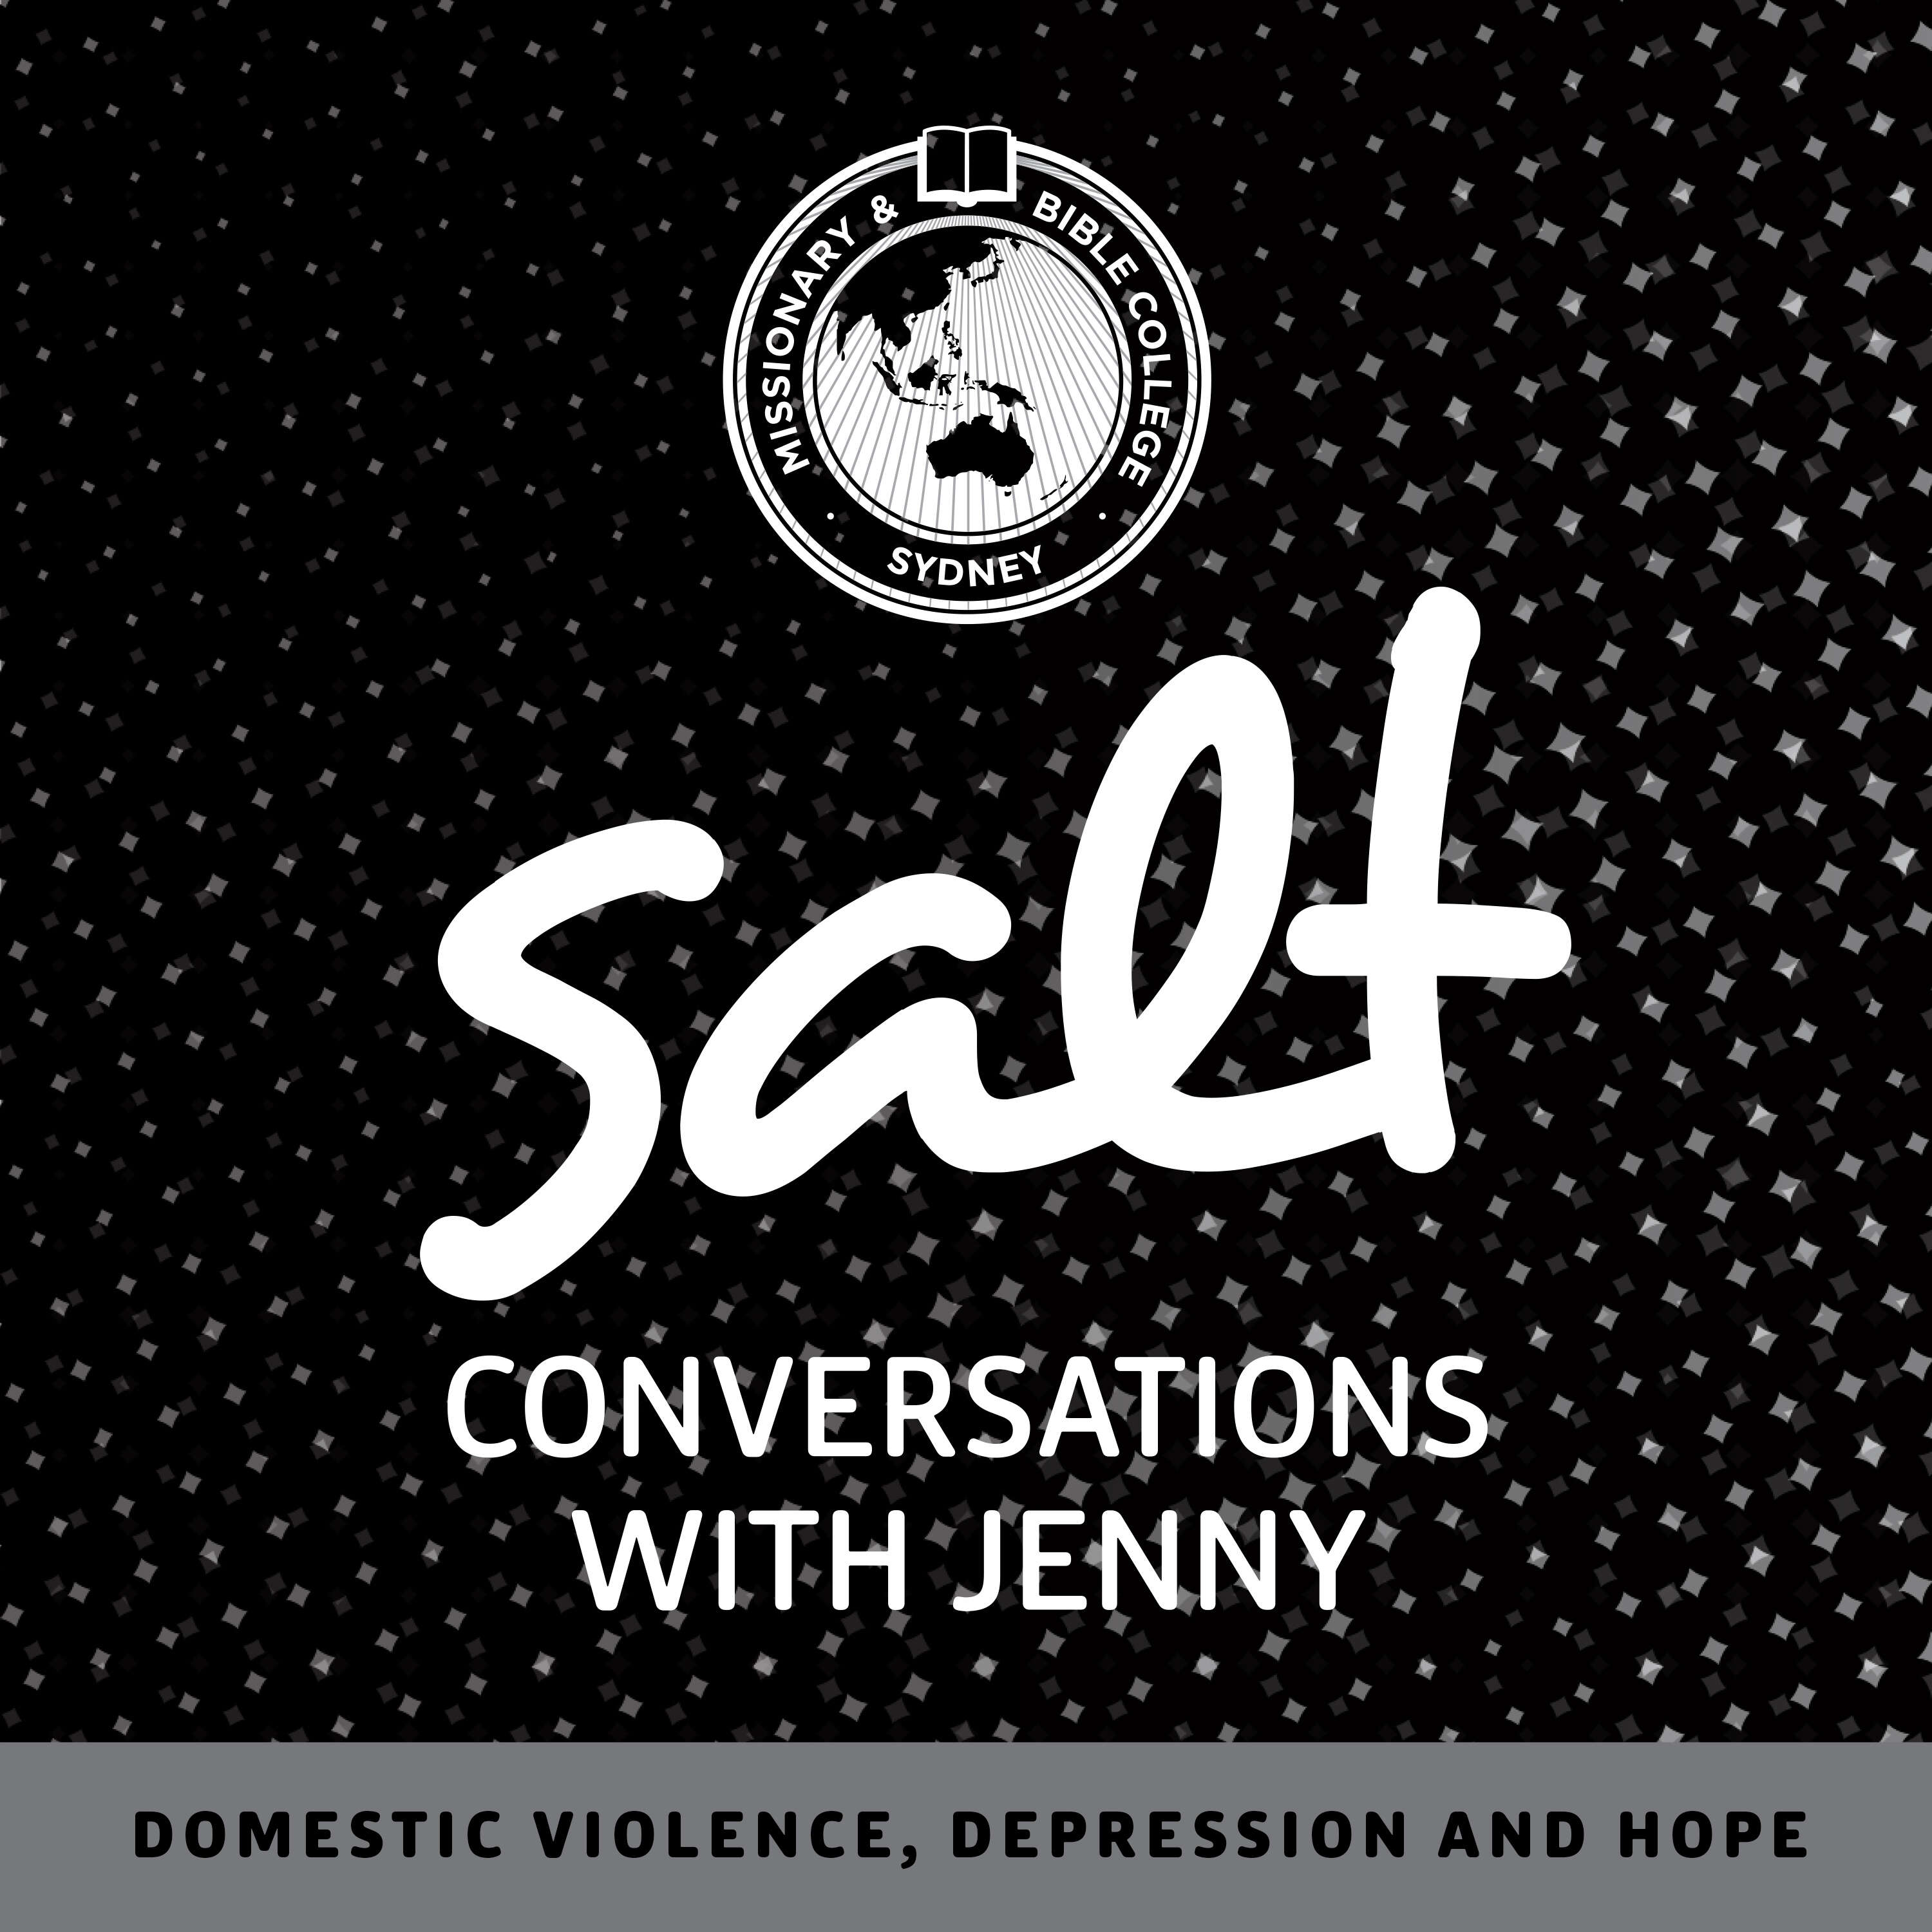 Domestic violence, depression and hope - Helen